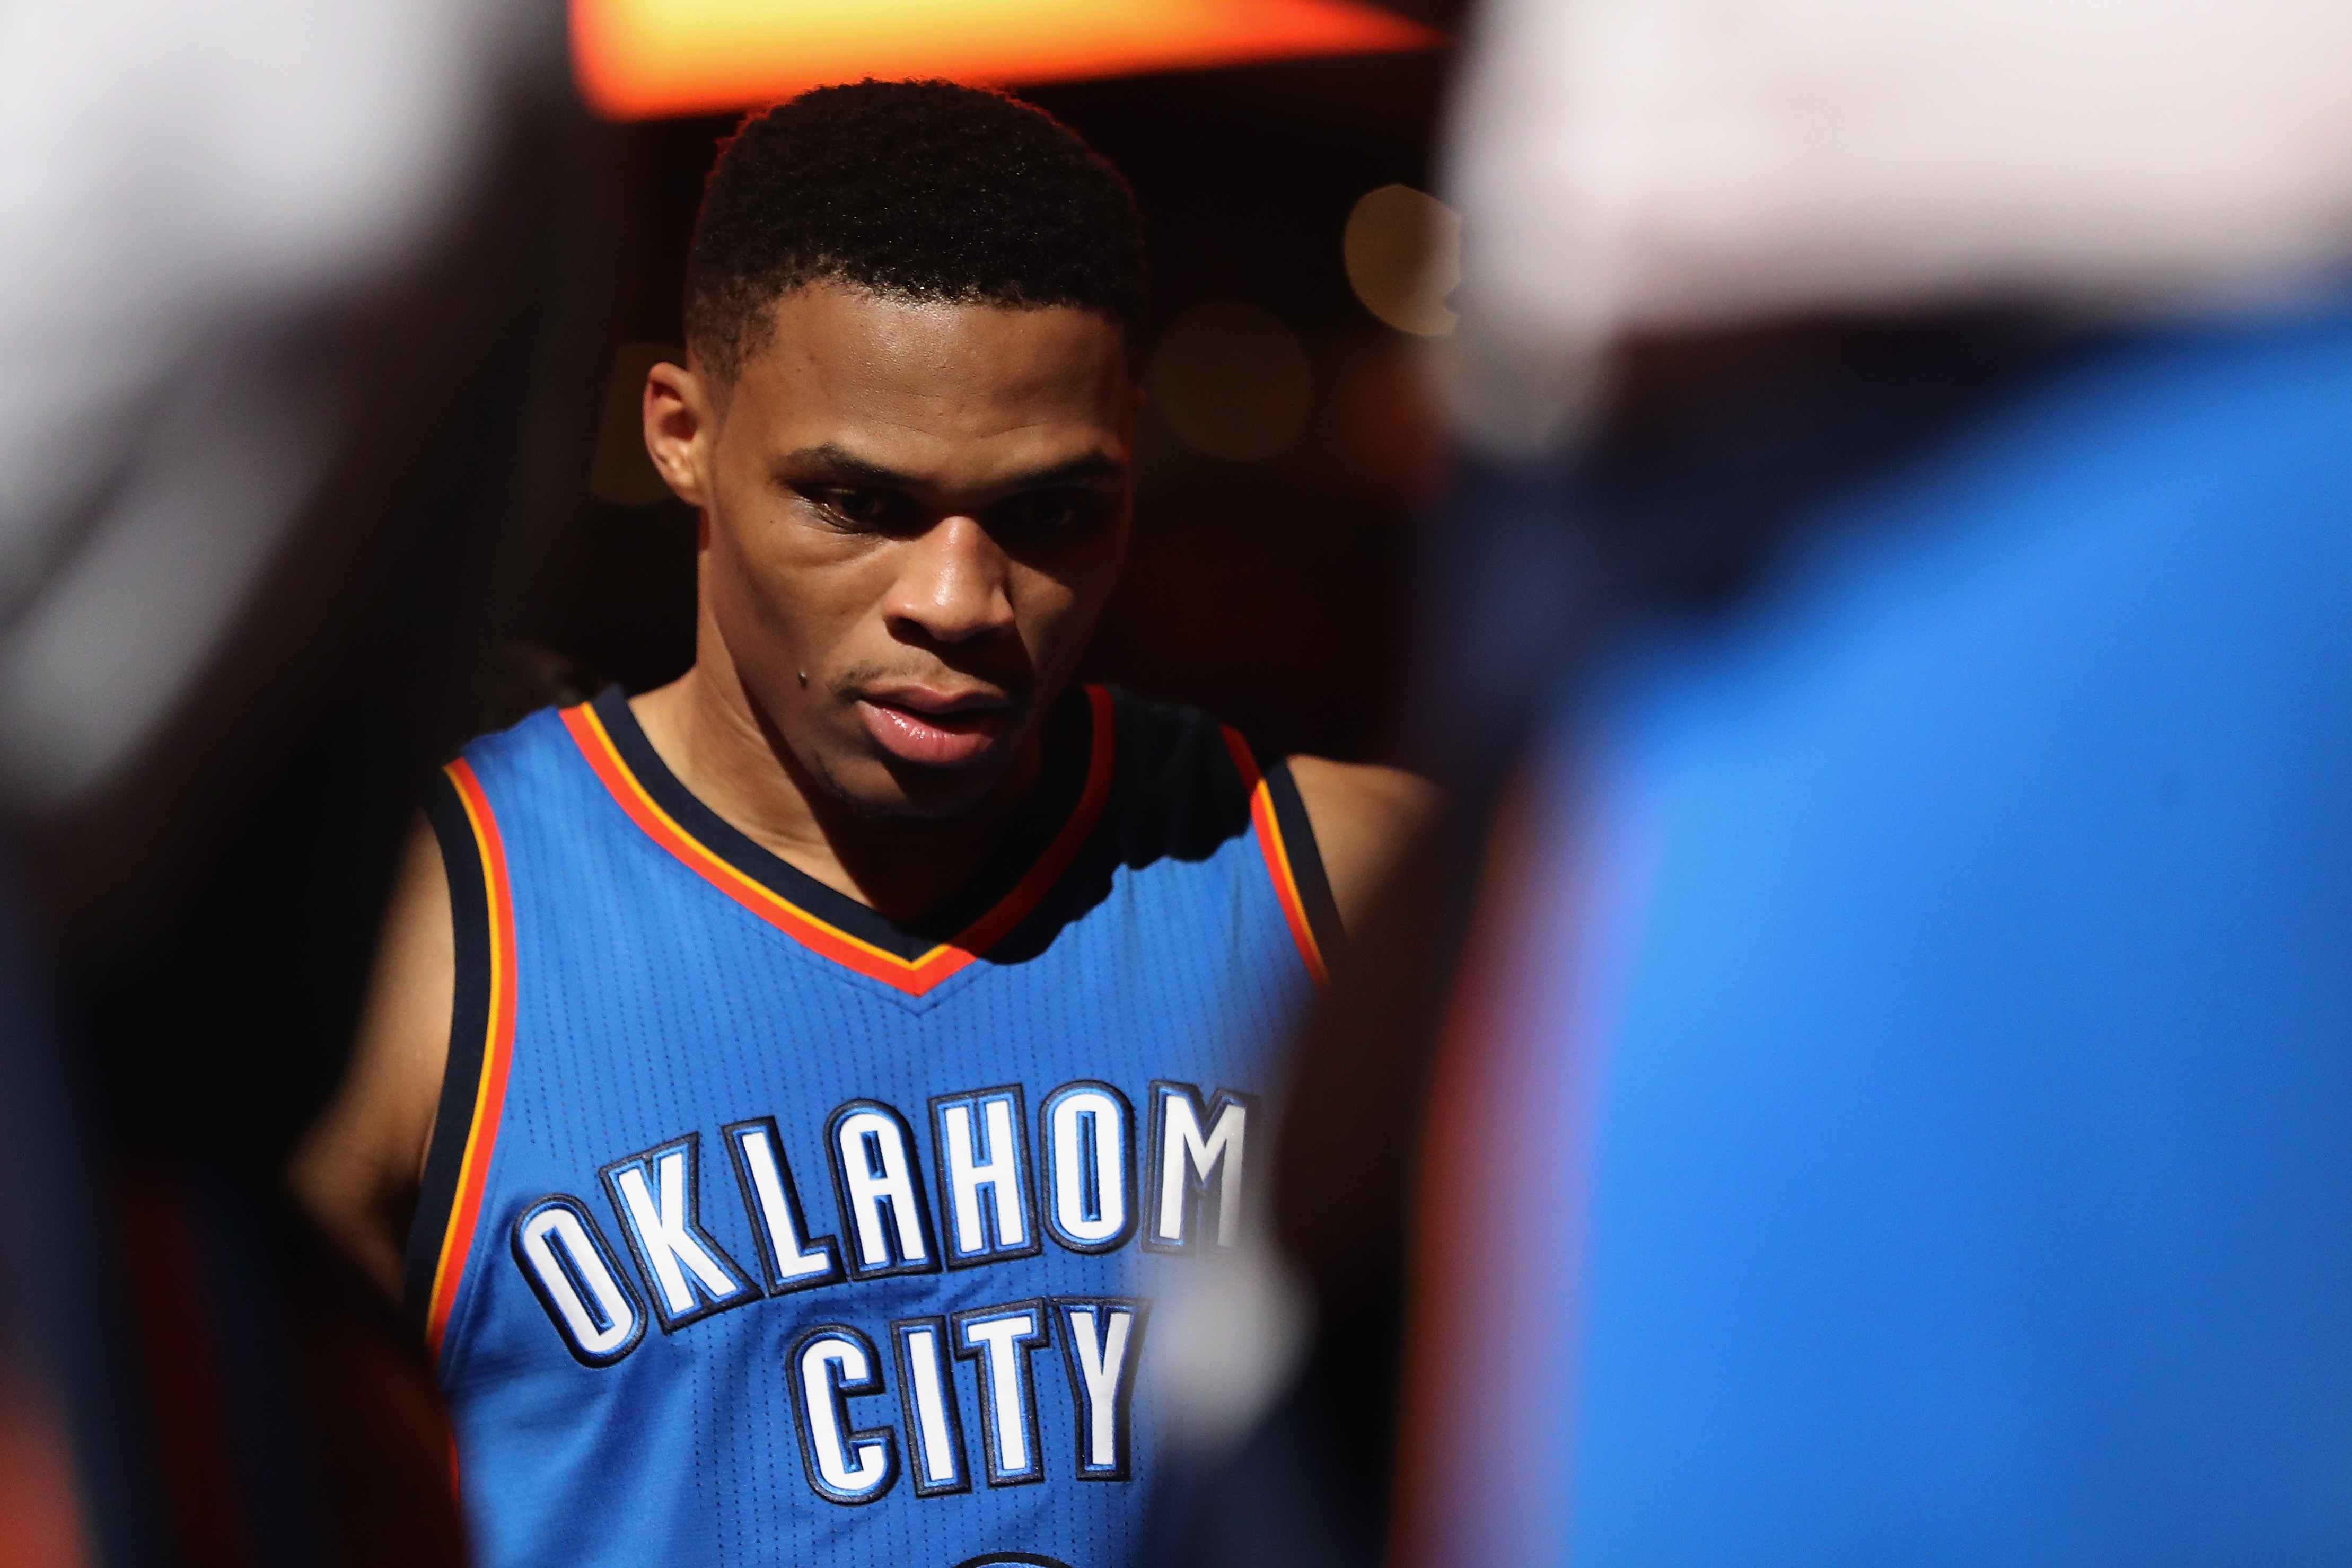 Russell Westbrook's jersey one of highest selling among NBA